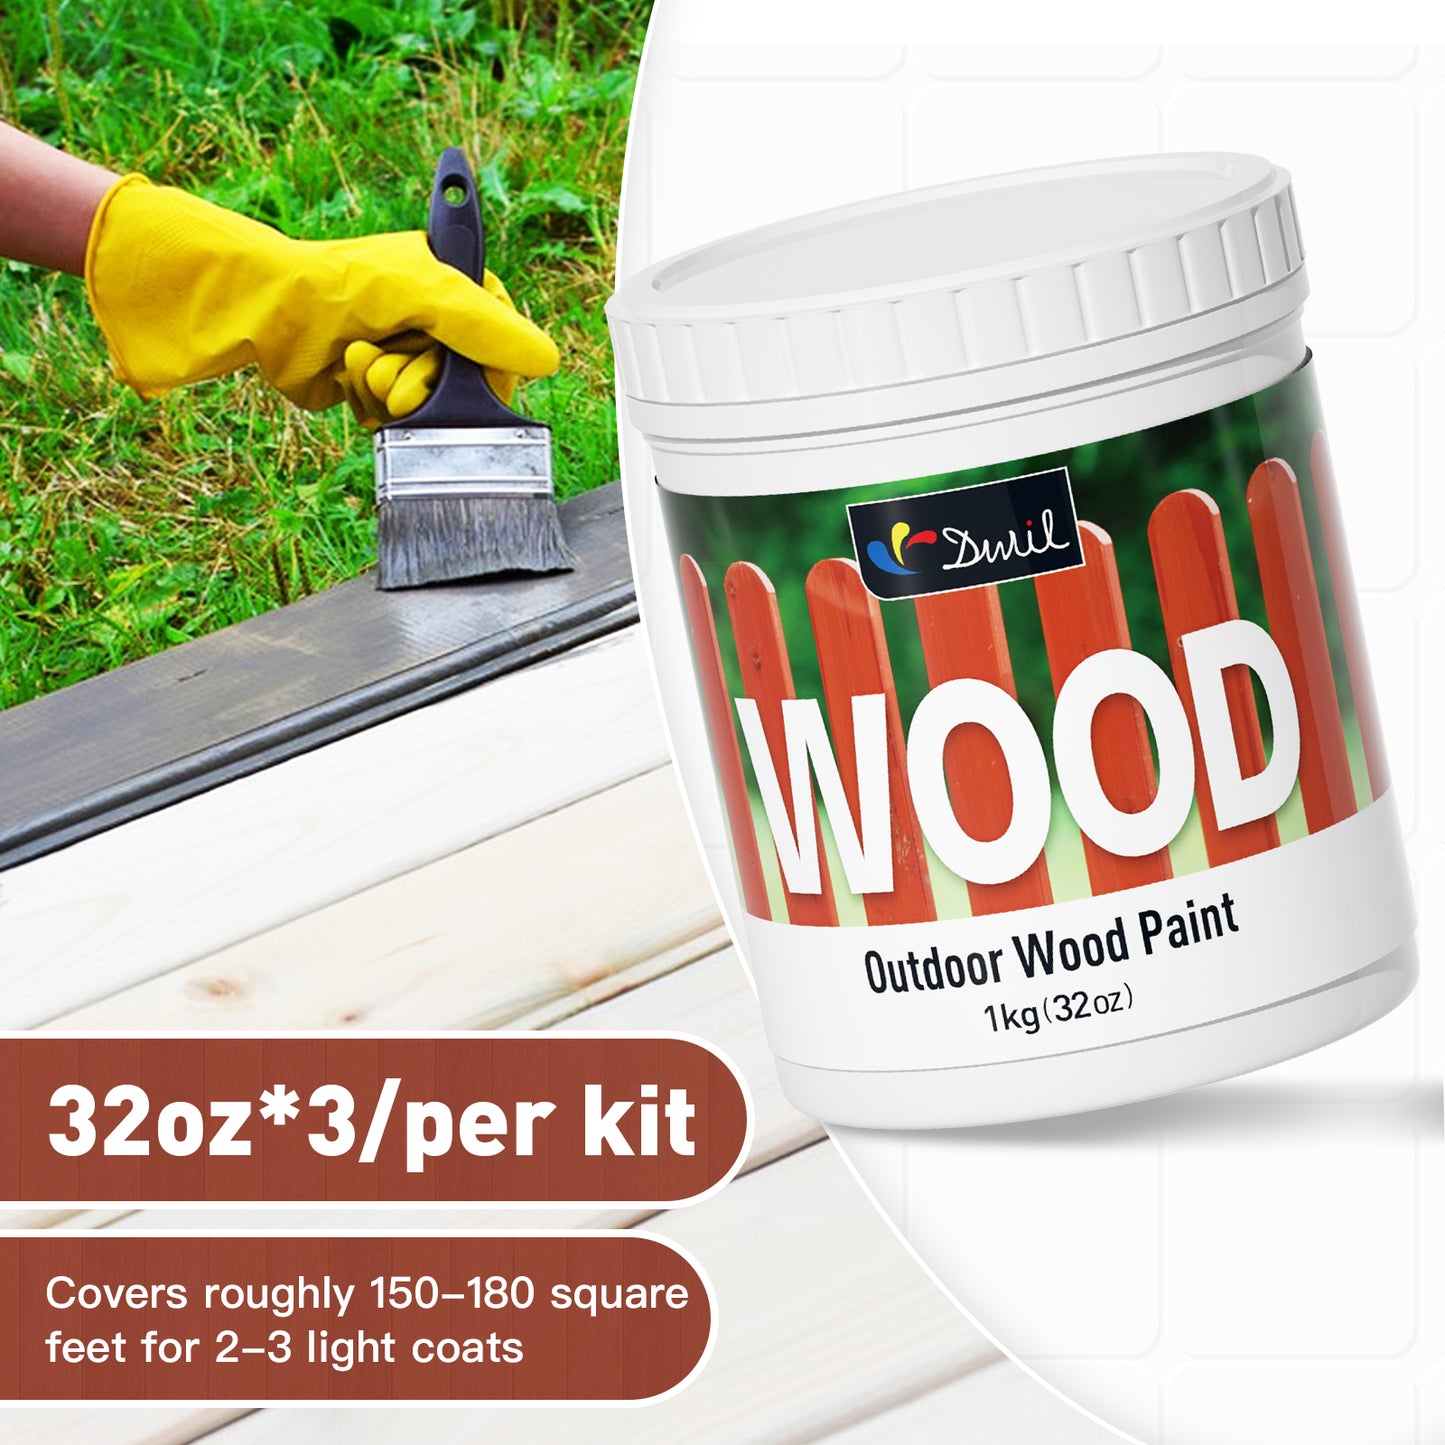 DWIL Outdoor Wood Furniture Paint Kit (with tools)